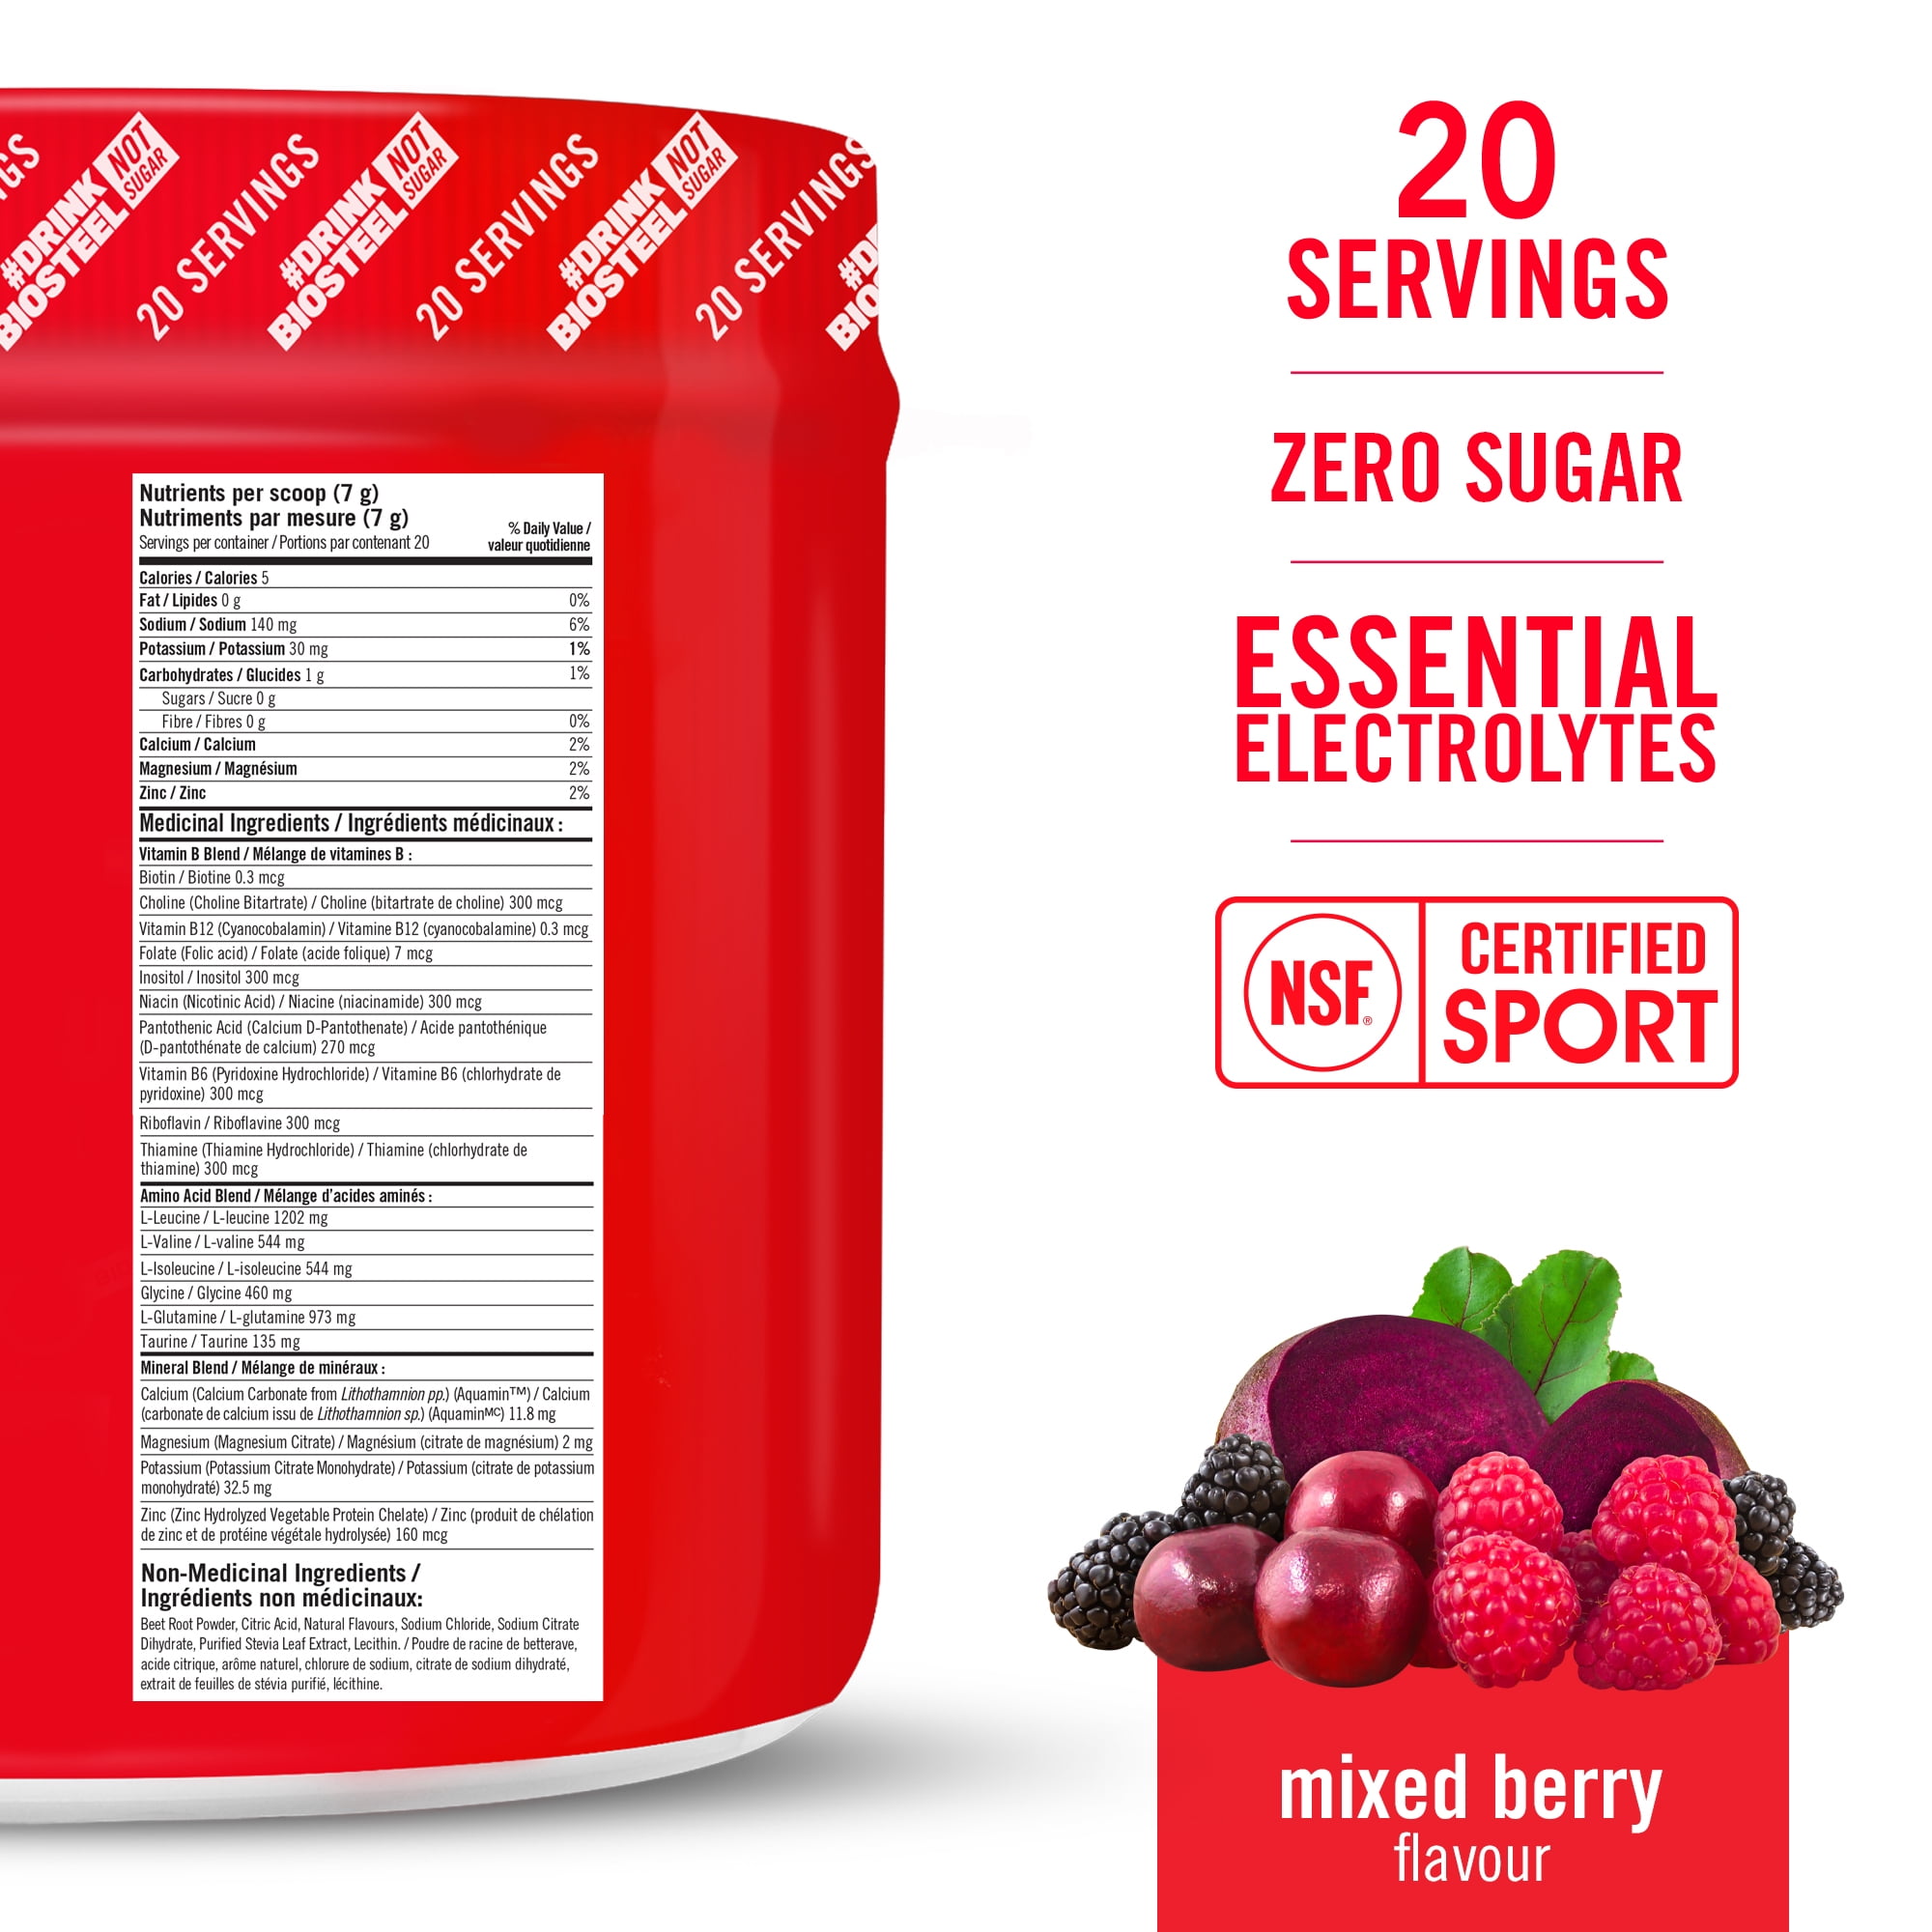  BIOSTEEL Hydration Mix - Sugar Free, Essential Electrolyte  Sports Drink Powder - Mixed Berry - 45 Servings : Health & Household